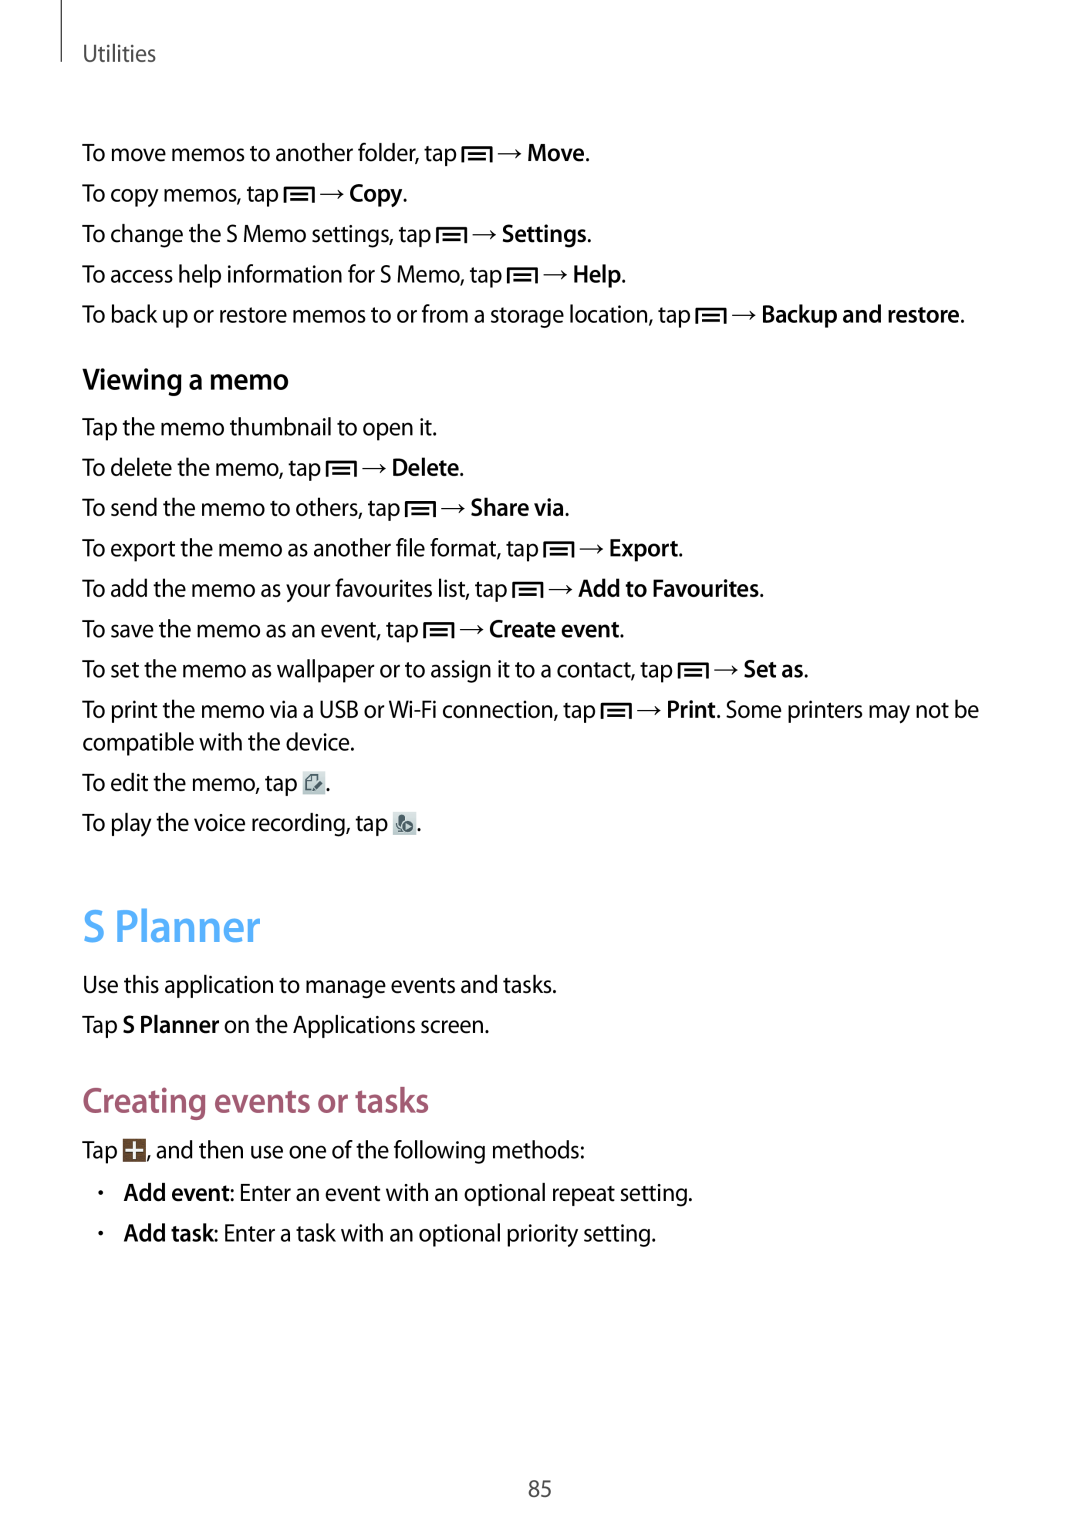 Samsung GT-I9060MKADRE, GT-I9060EGAXEF, GT-I9060ZWAXEF manual S Planner, Creating events or tasks, Viewing a memo, Utilities 